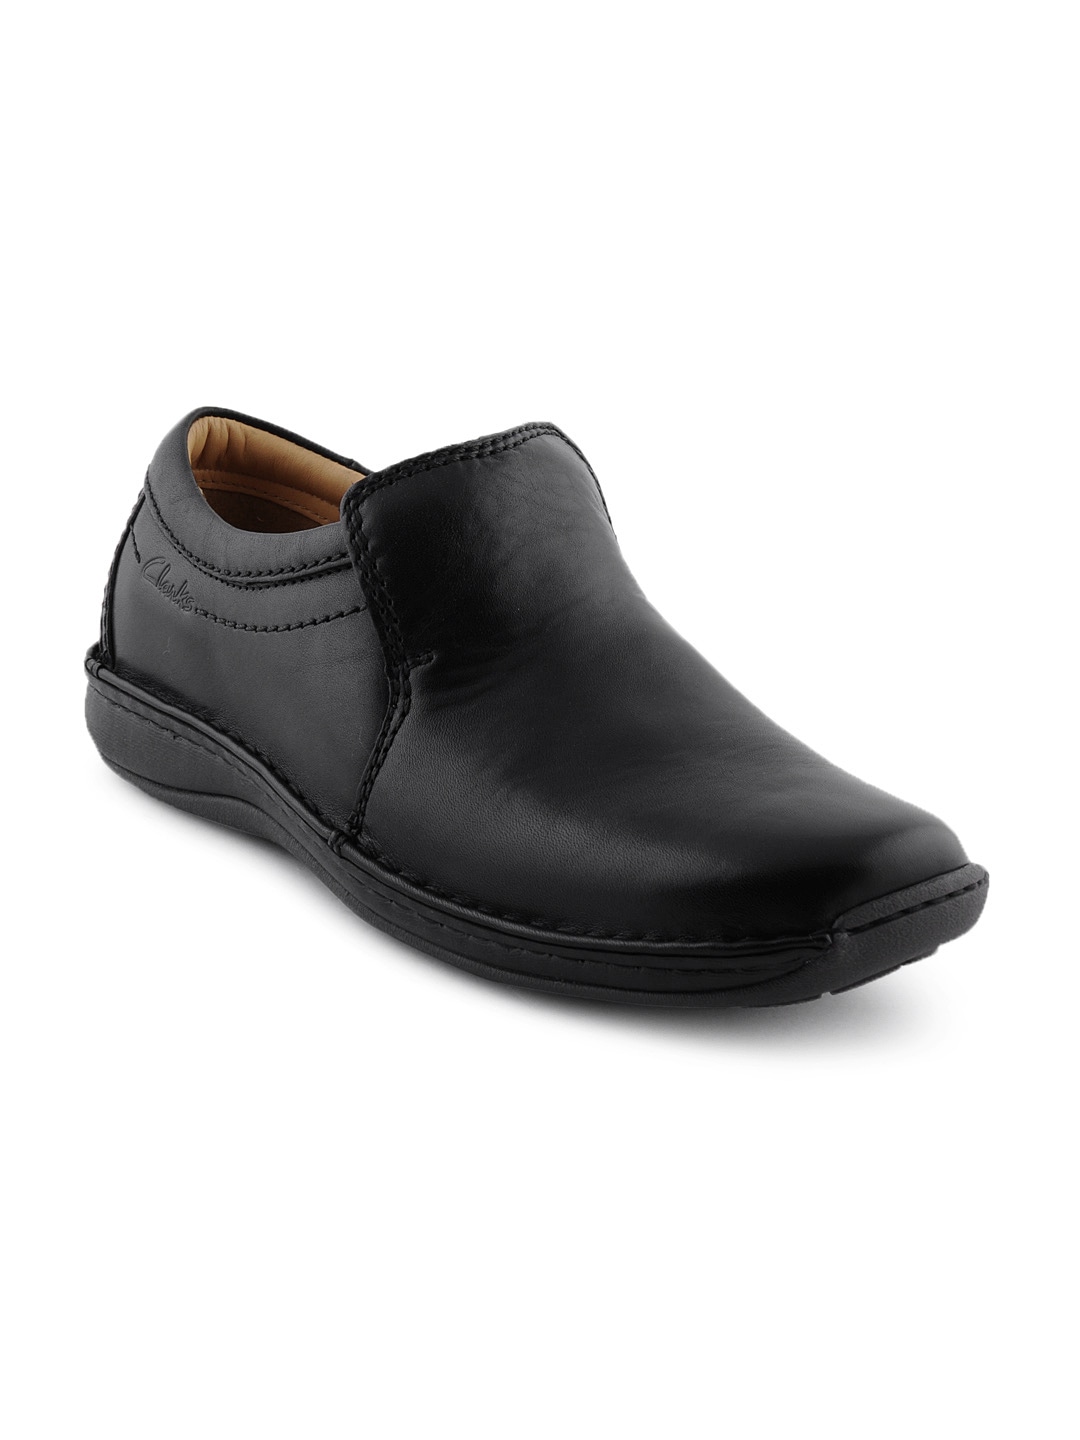 Clarks Men Black Stroll Over Casual Shoes